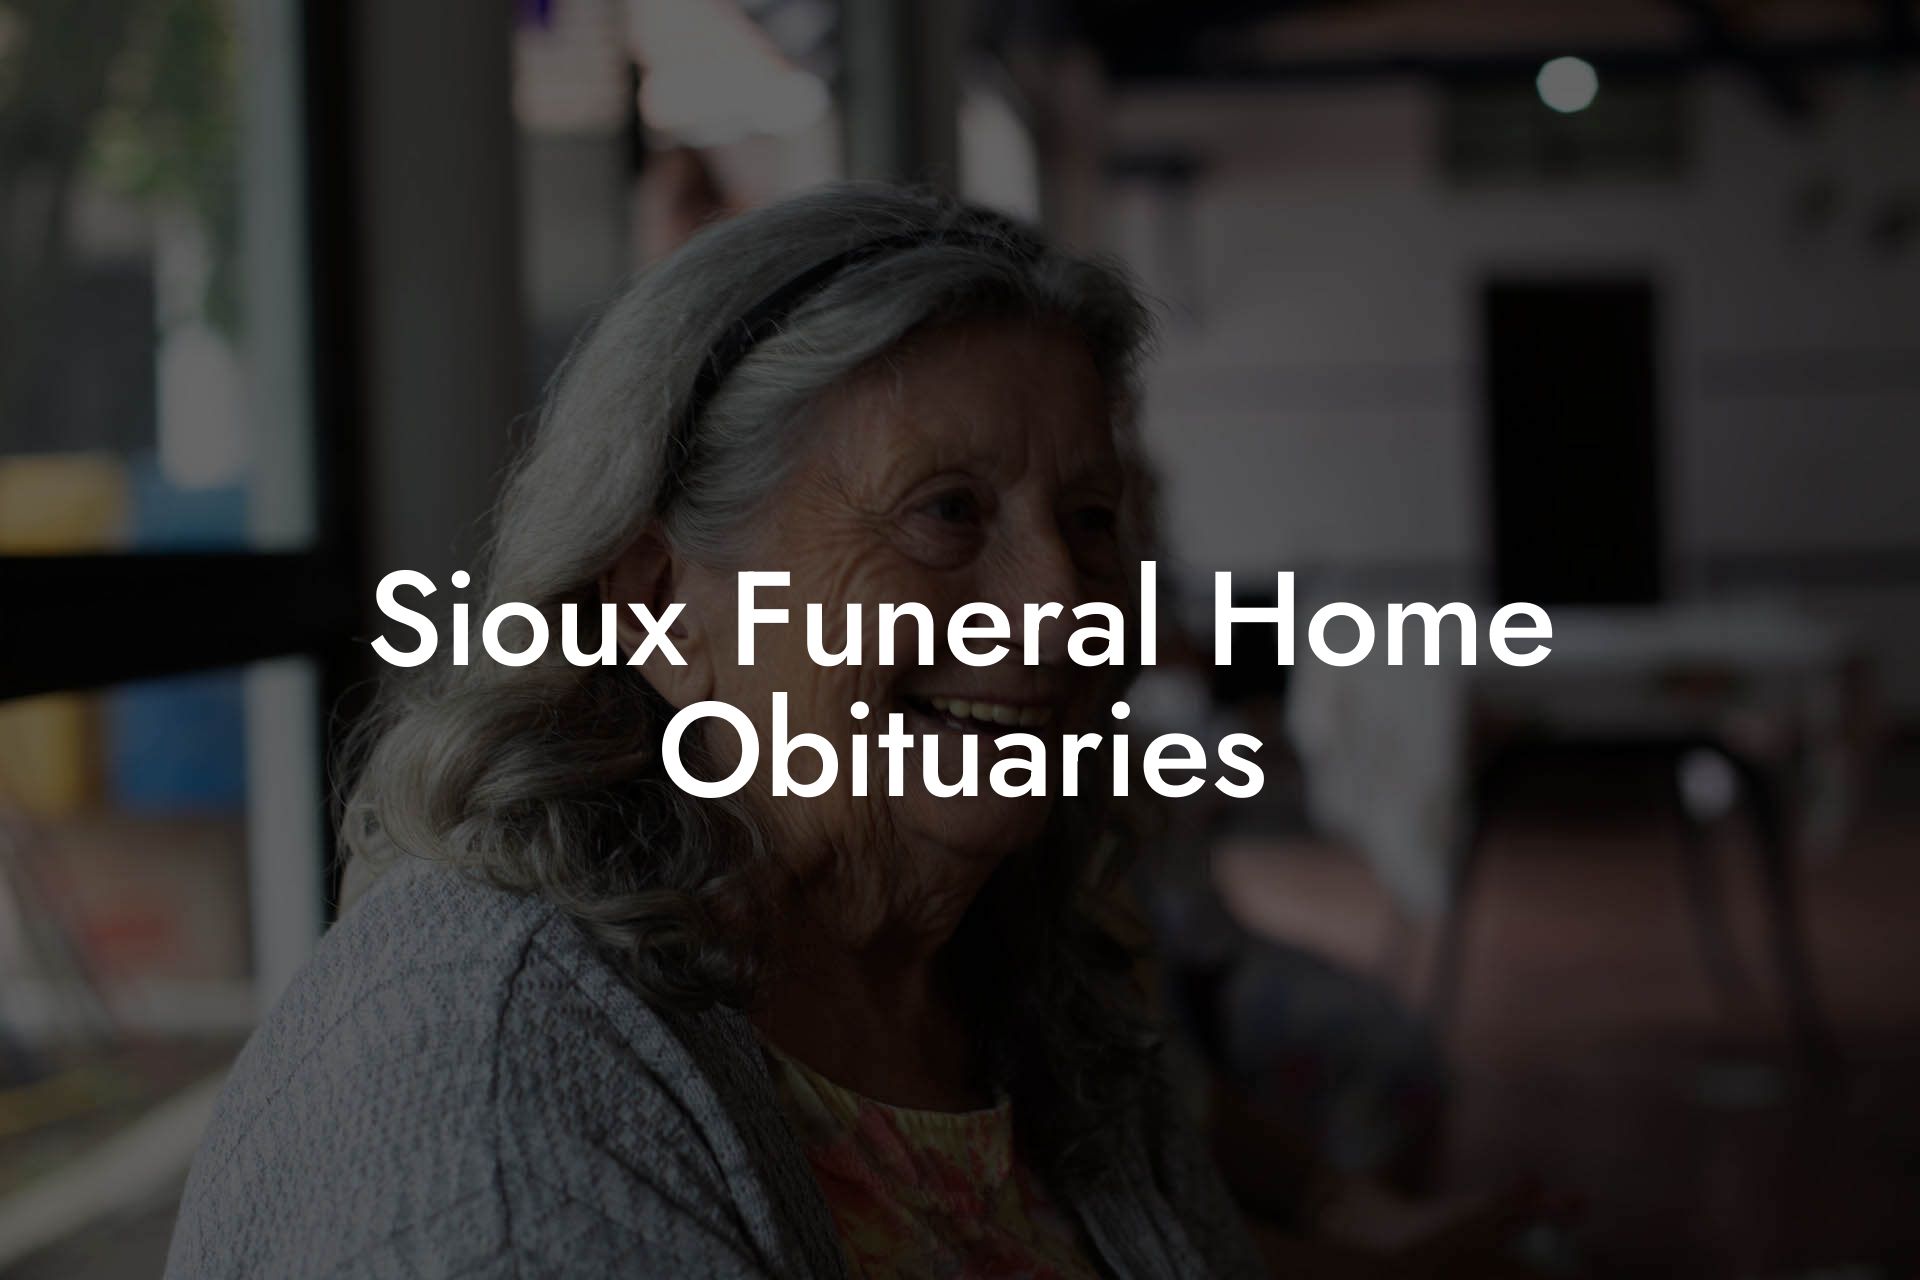 Sioux Funeral Home Obituaries